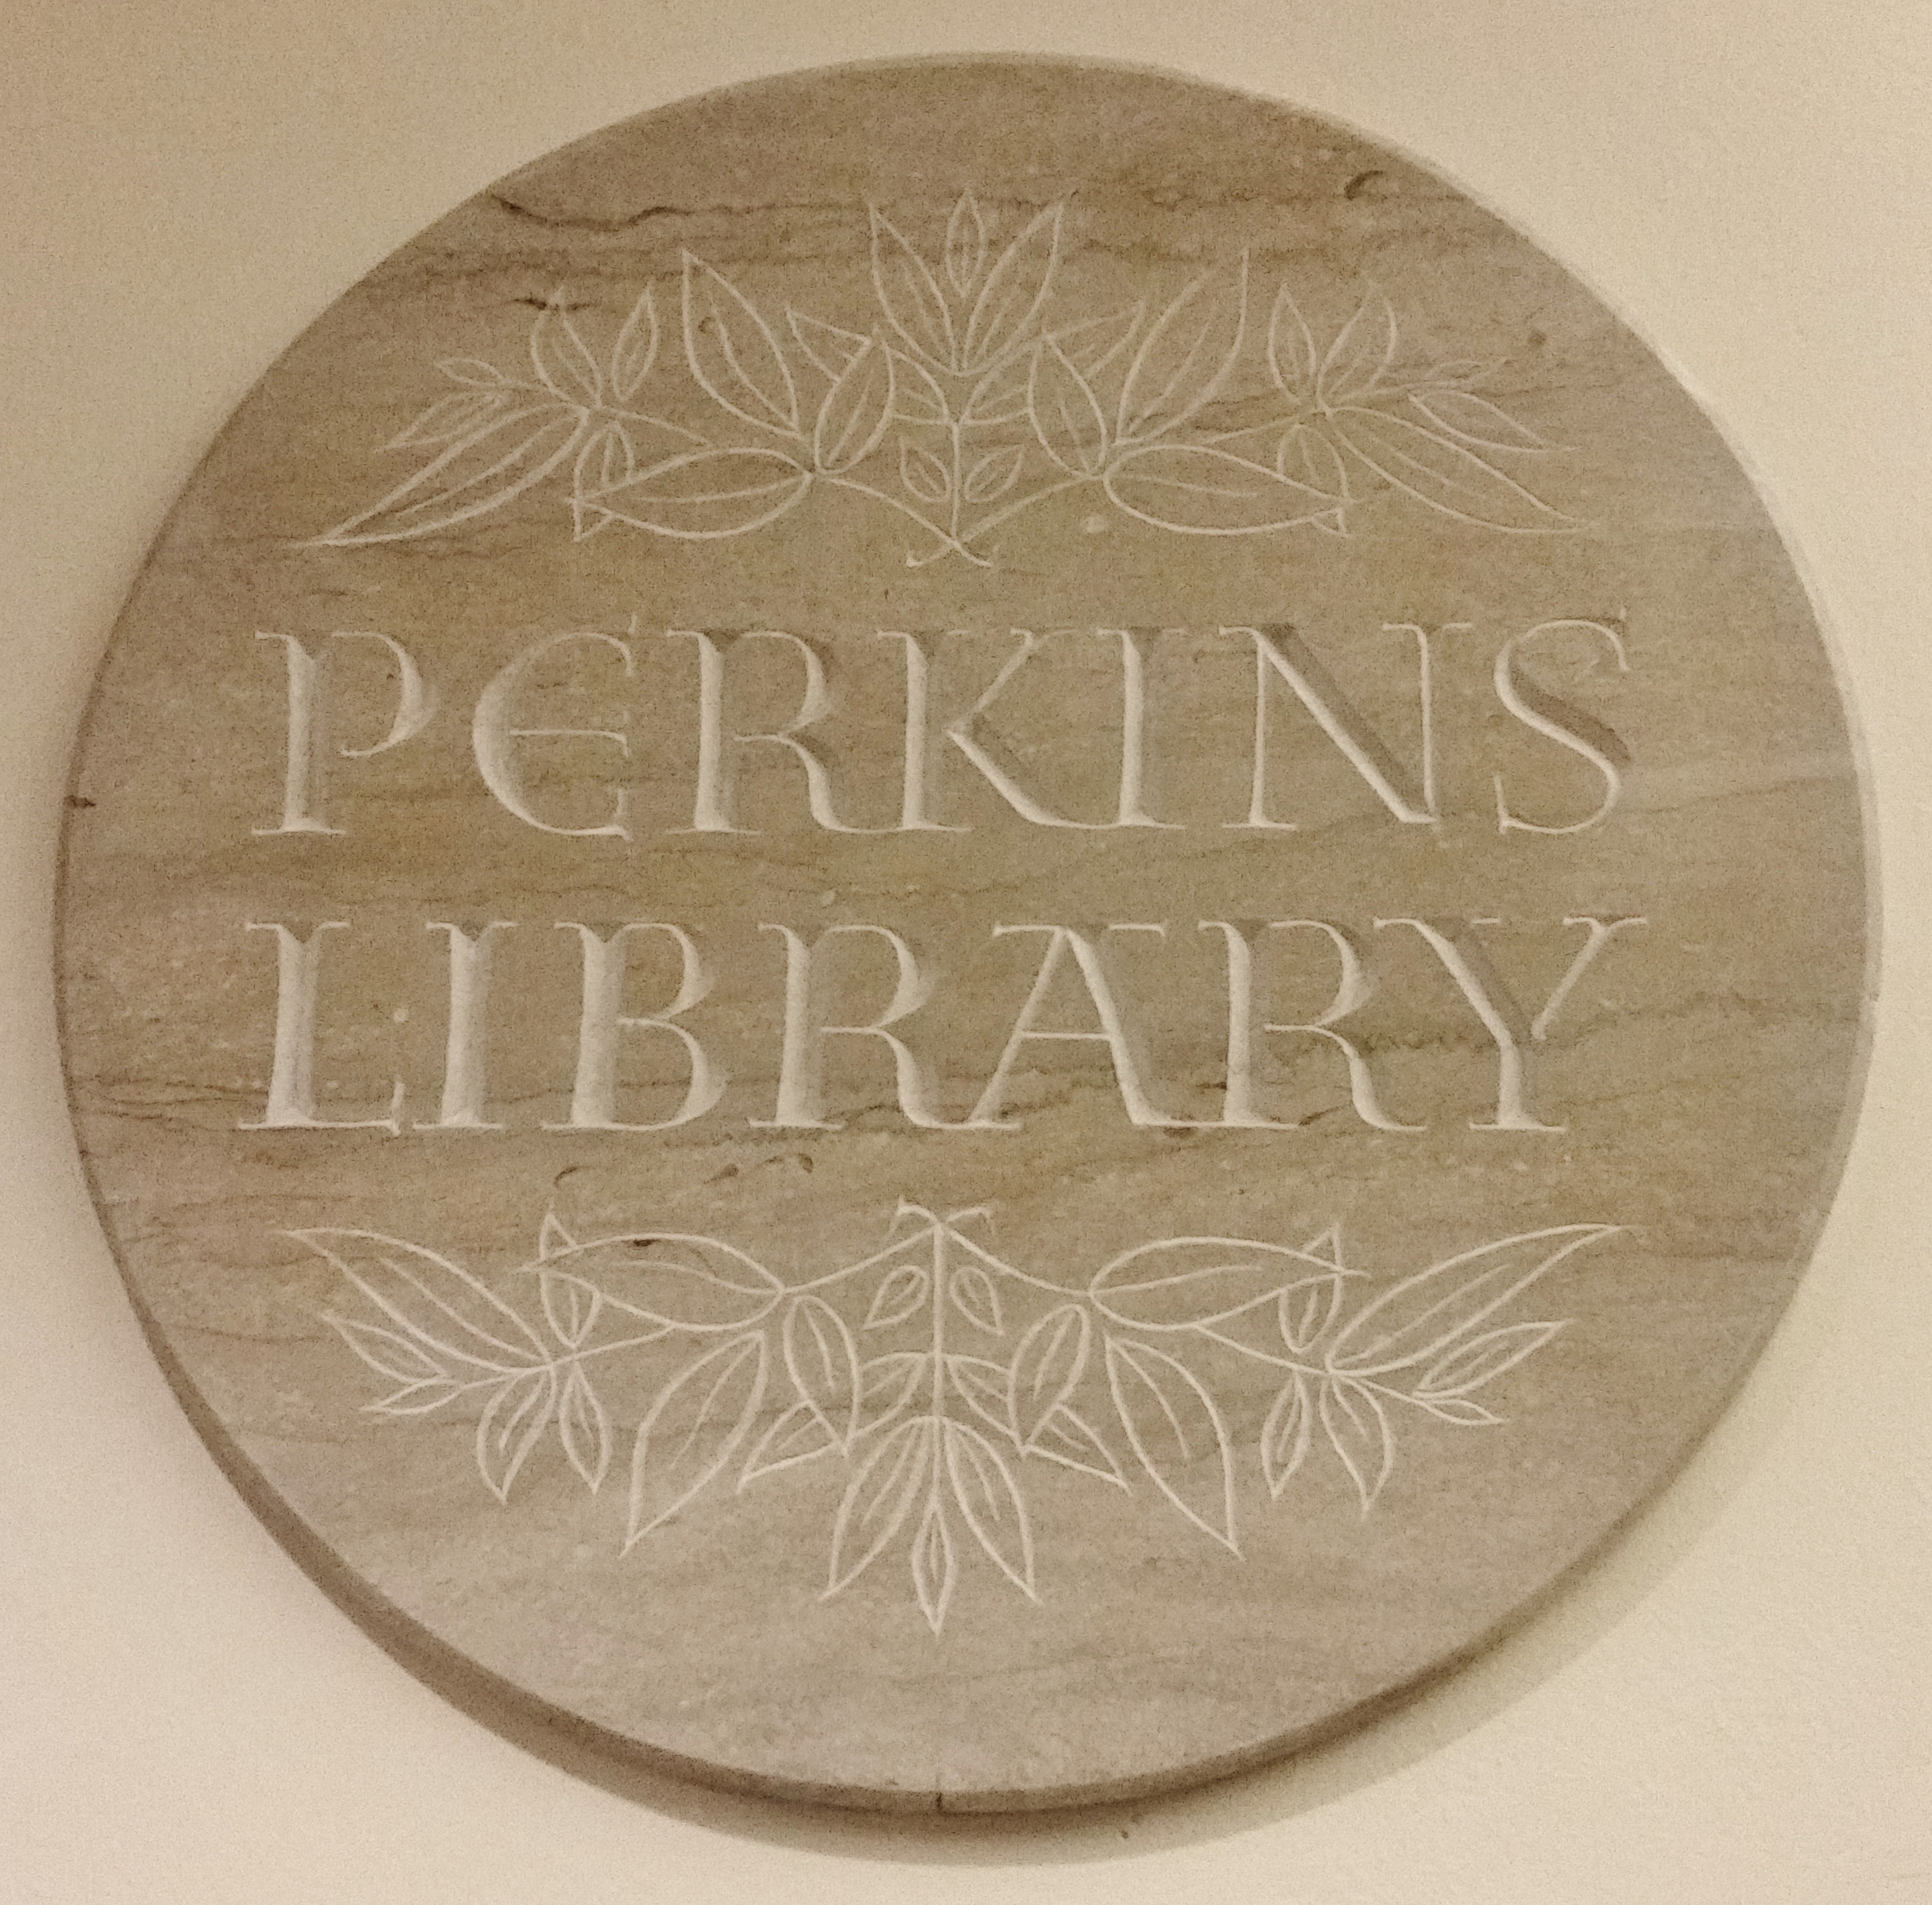 Wall sign for Perkins Library